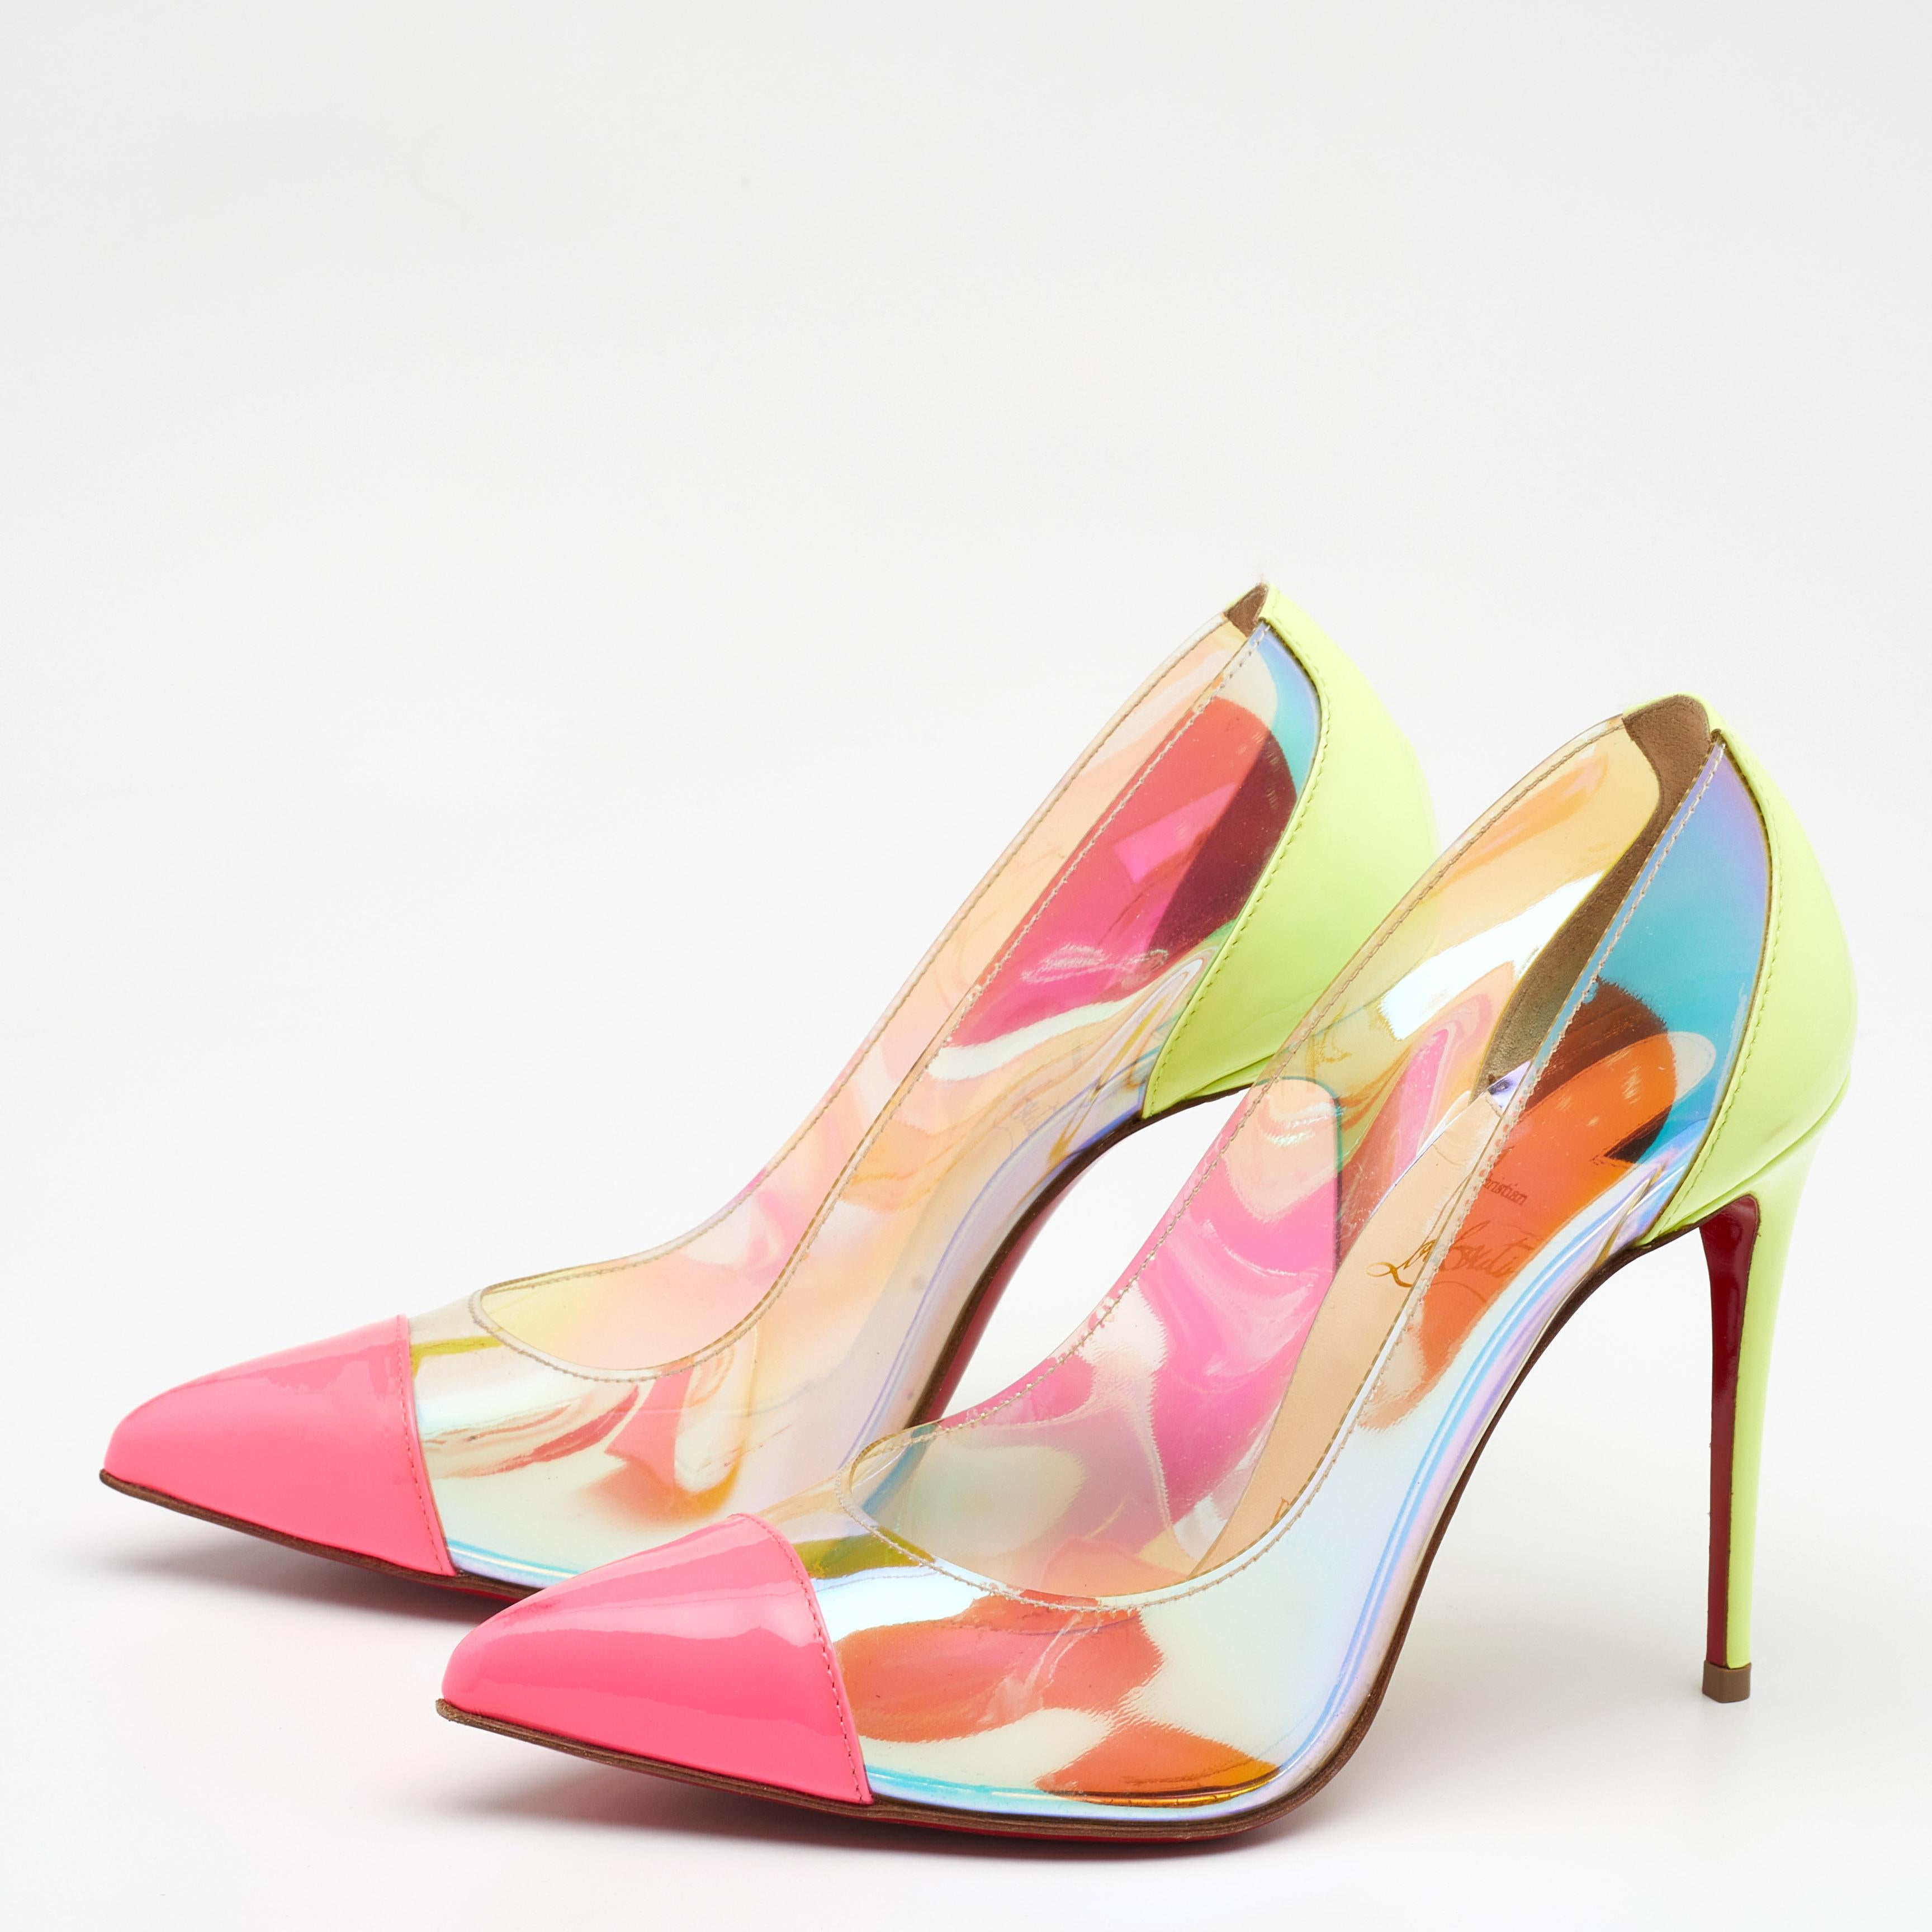 Take every step with elegance and style in these pumps from the House of Christian Louboutin. They are crafted meticulously using multicolored PVC and patent leather. They showcase pointed toes, a slip-on style, and slim heels. These beautiful CL